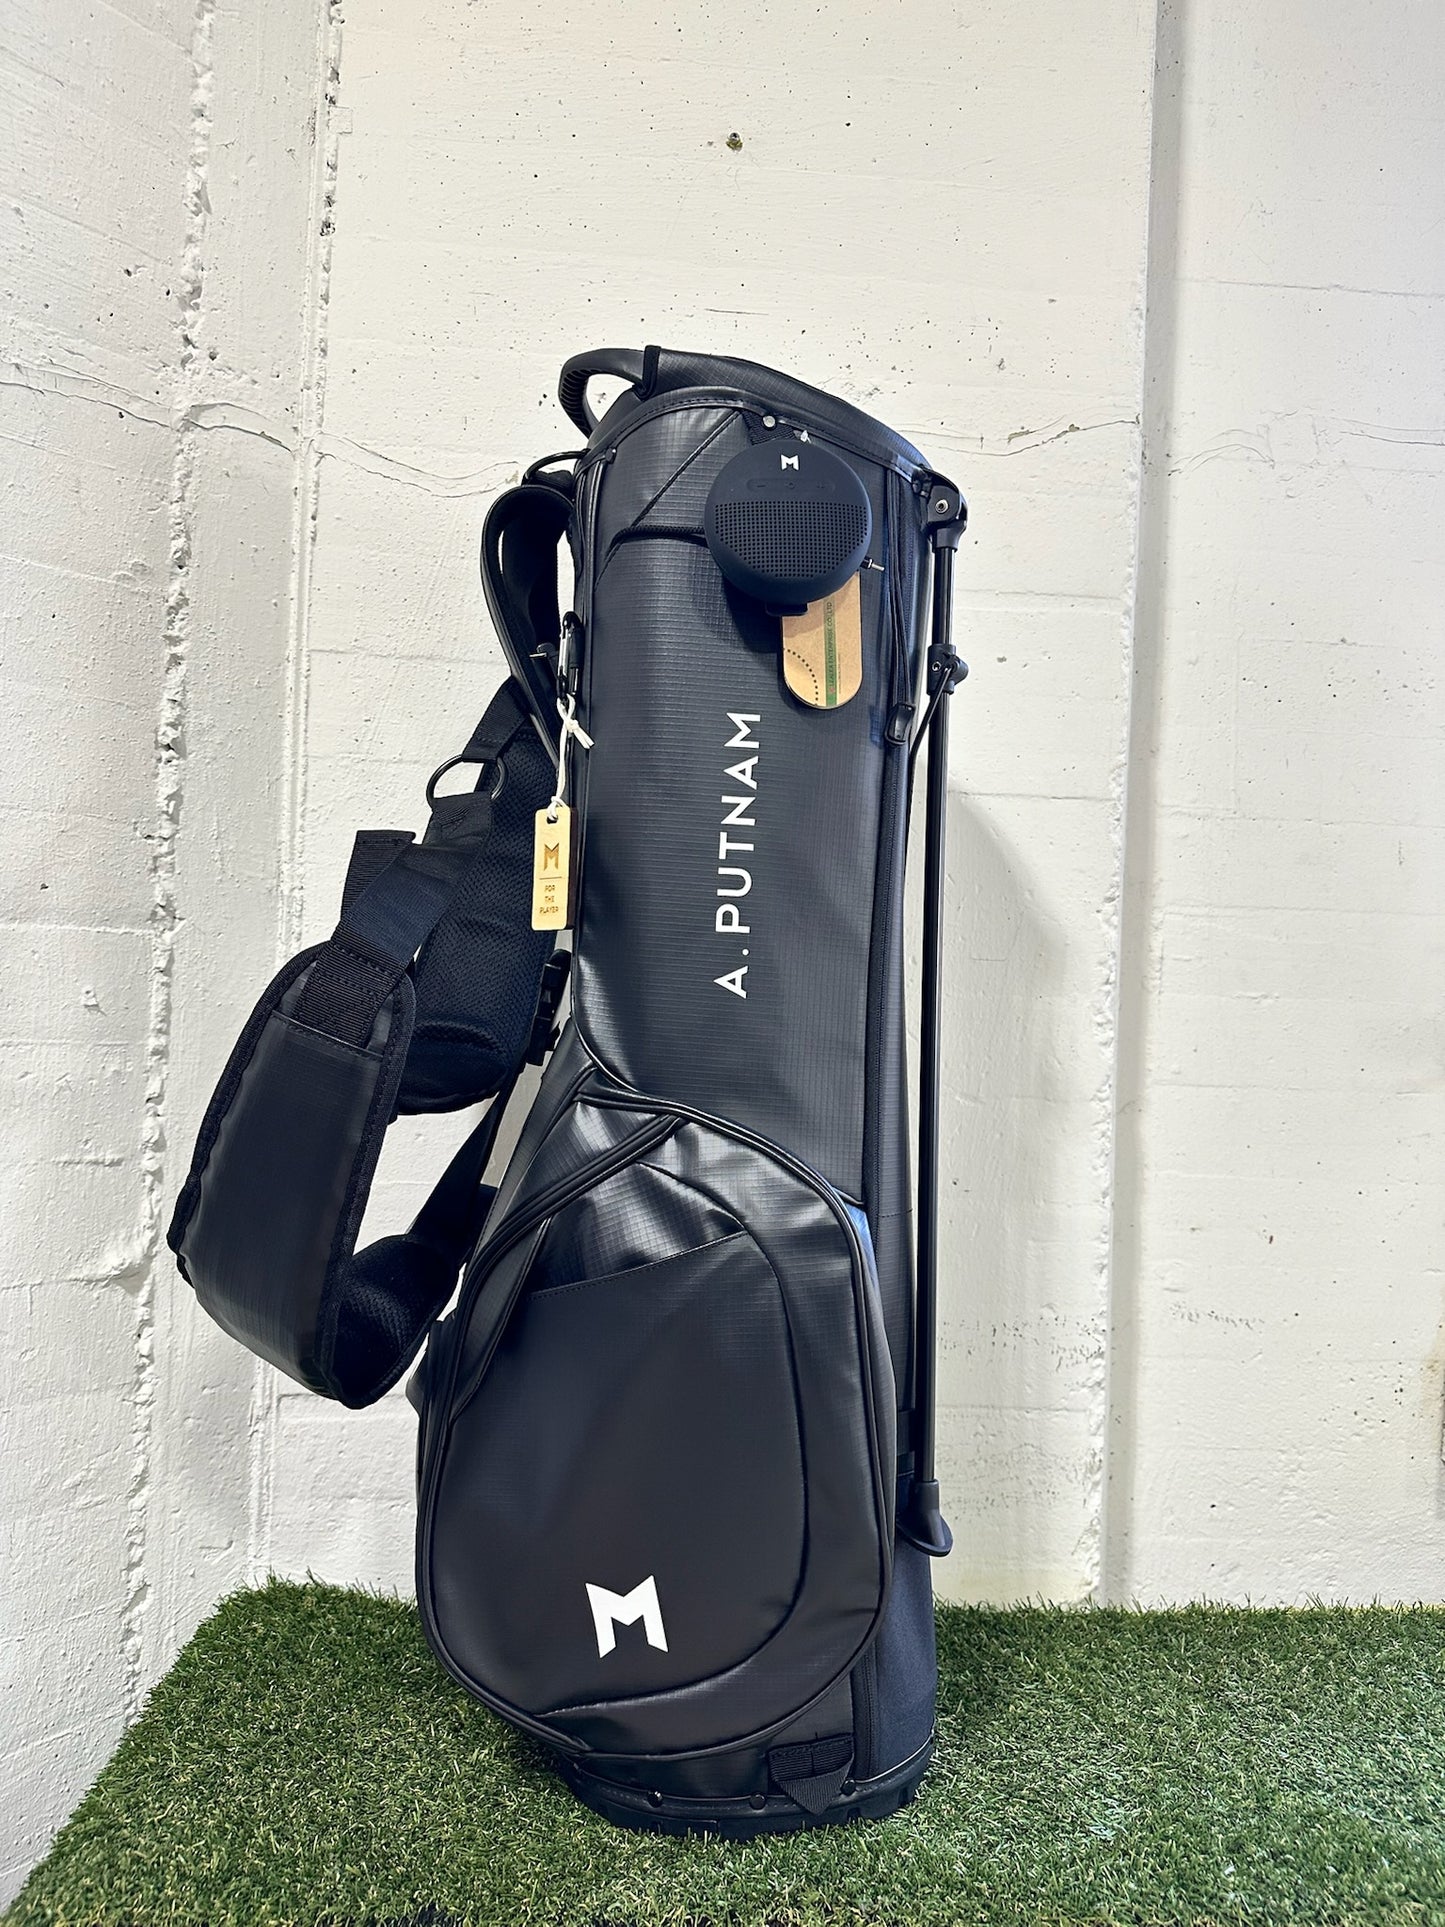 This is the black color way of the MR1 eco golf bag by MNML GOLF. This bag is made from 100% recycled material.